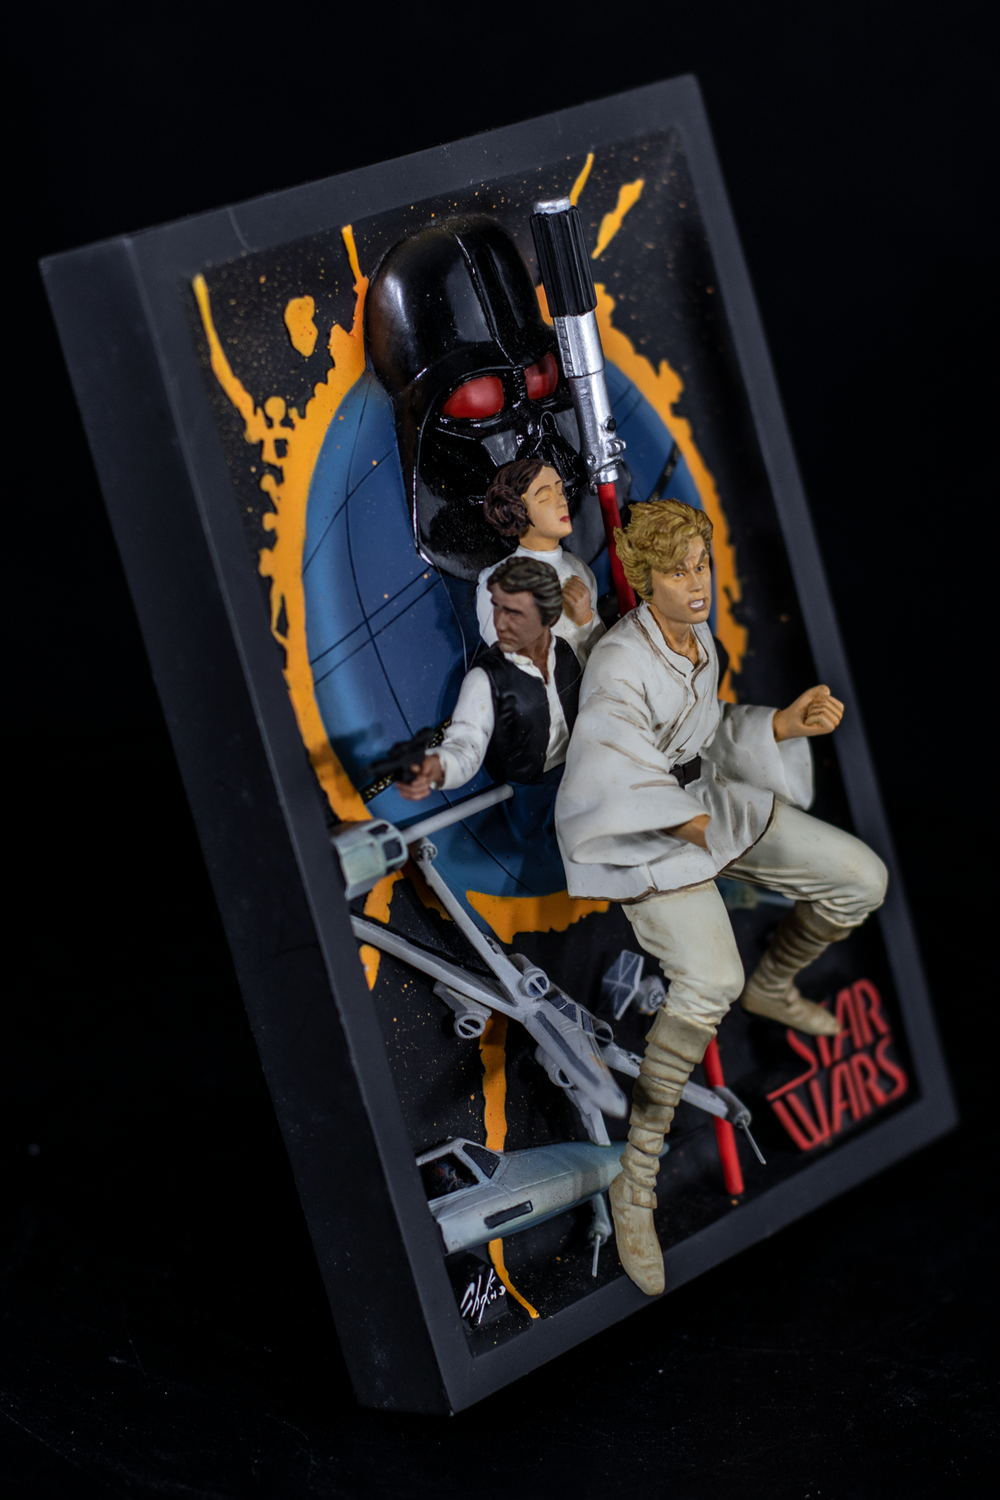 Star Wars: A New Hope "Collectible Movie Poster Sculpture " 1976 Convention Poster